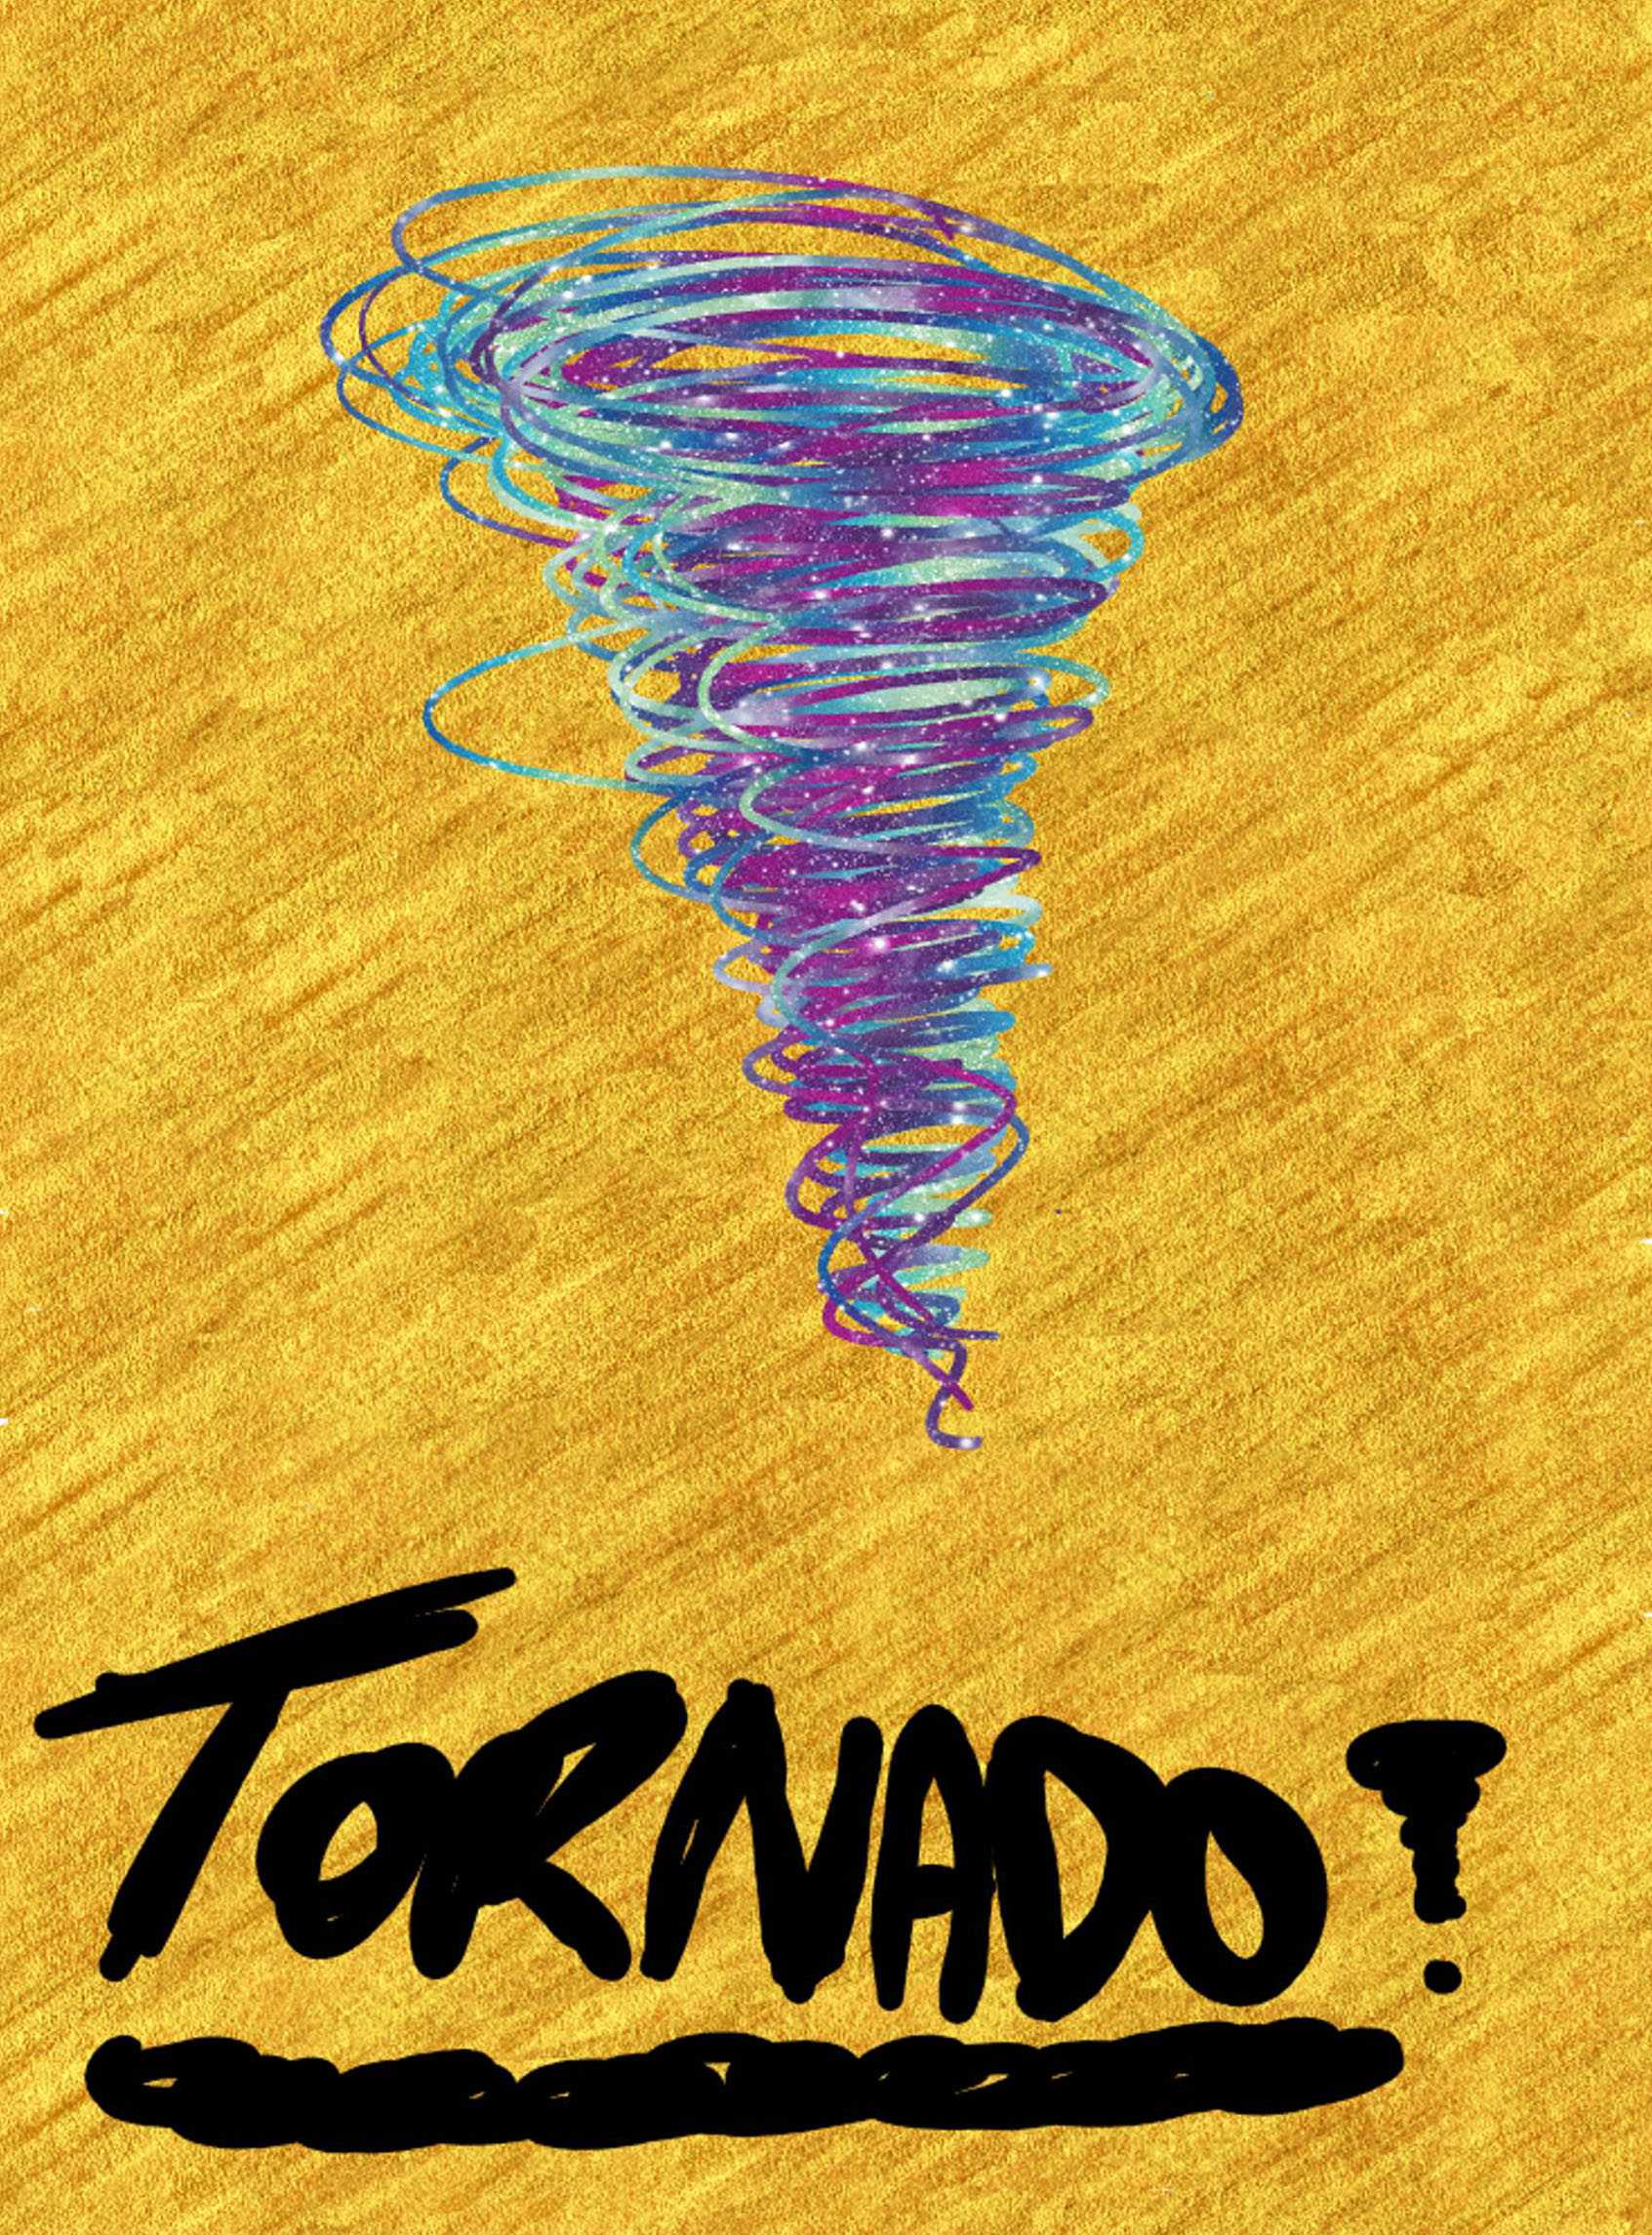 "Tornado" by Connor Page, Sawyer Roussel, and Jack Reynolds's computer